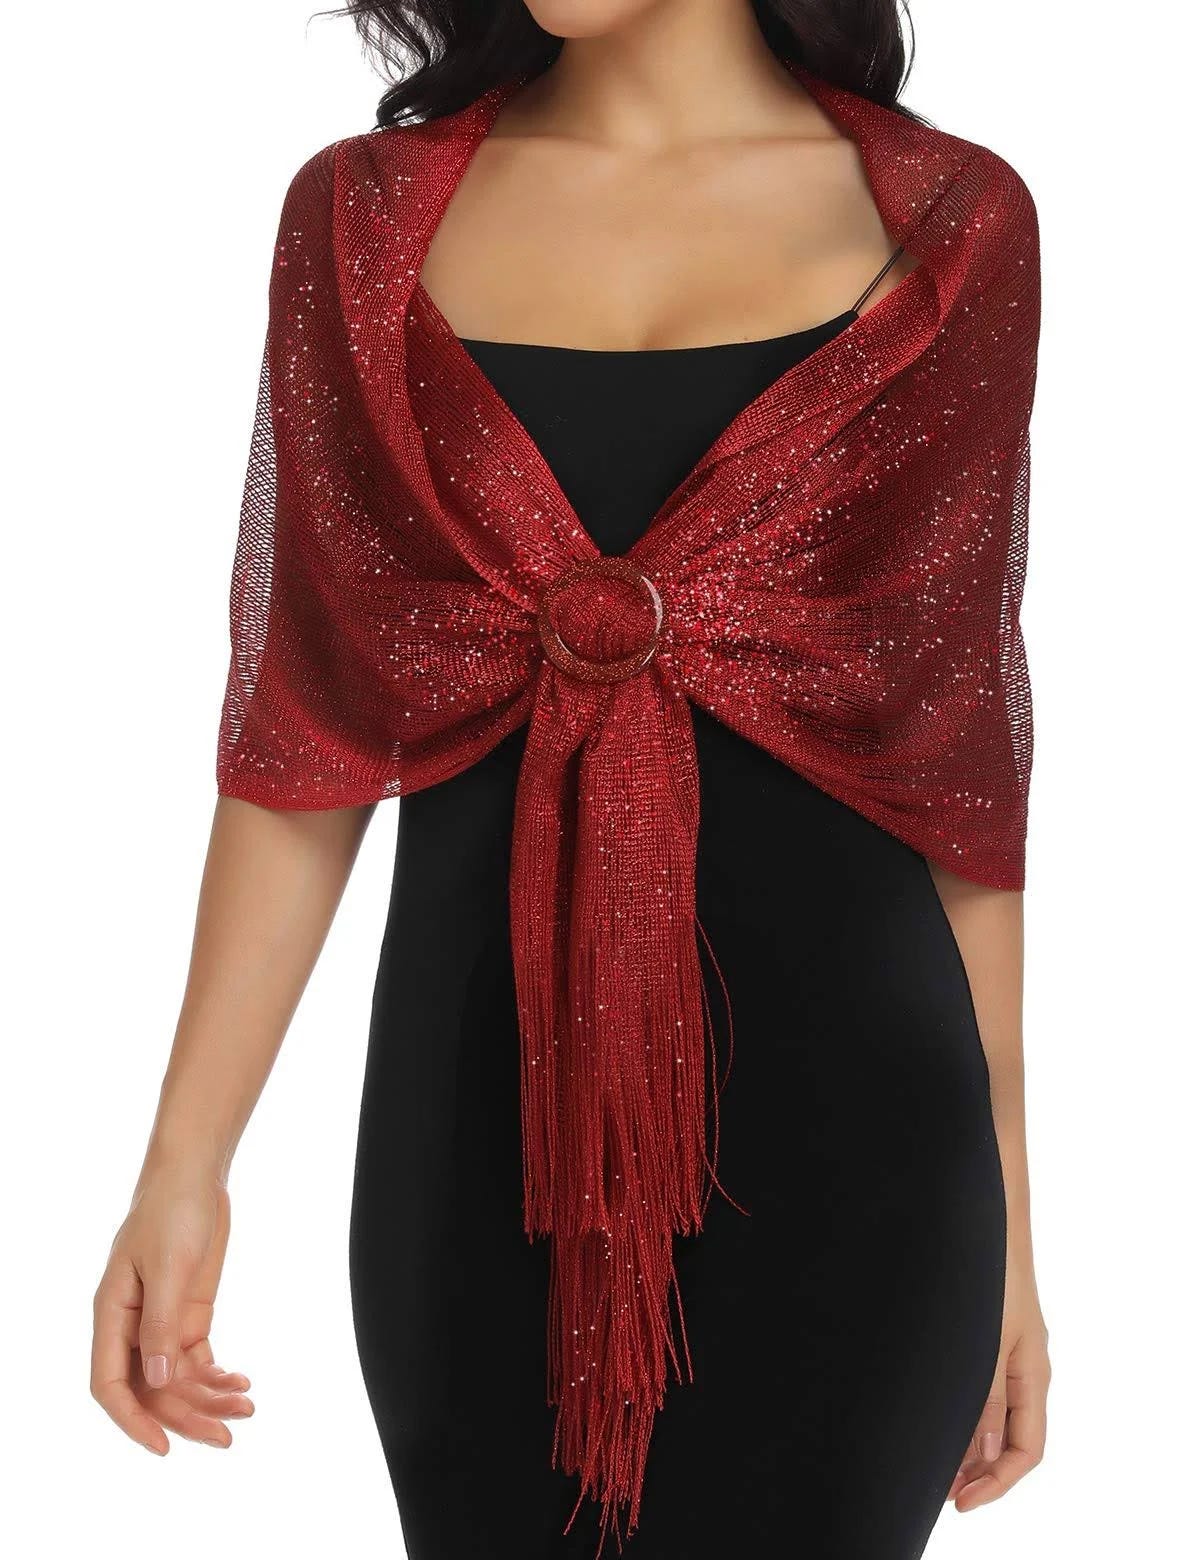 Luxurious Red Shawl with Metallic Thread for Evening Dresses | Image